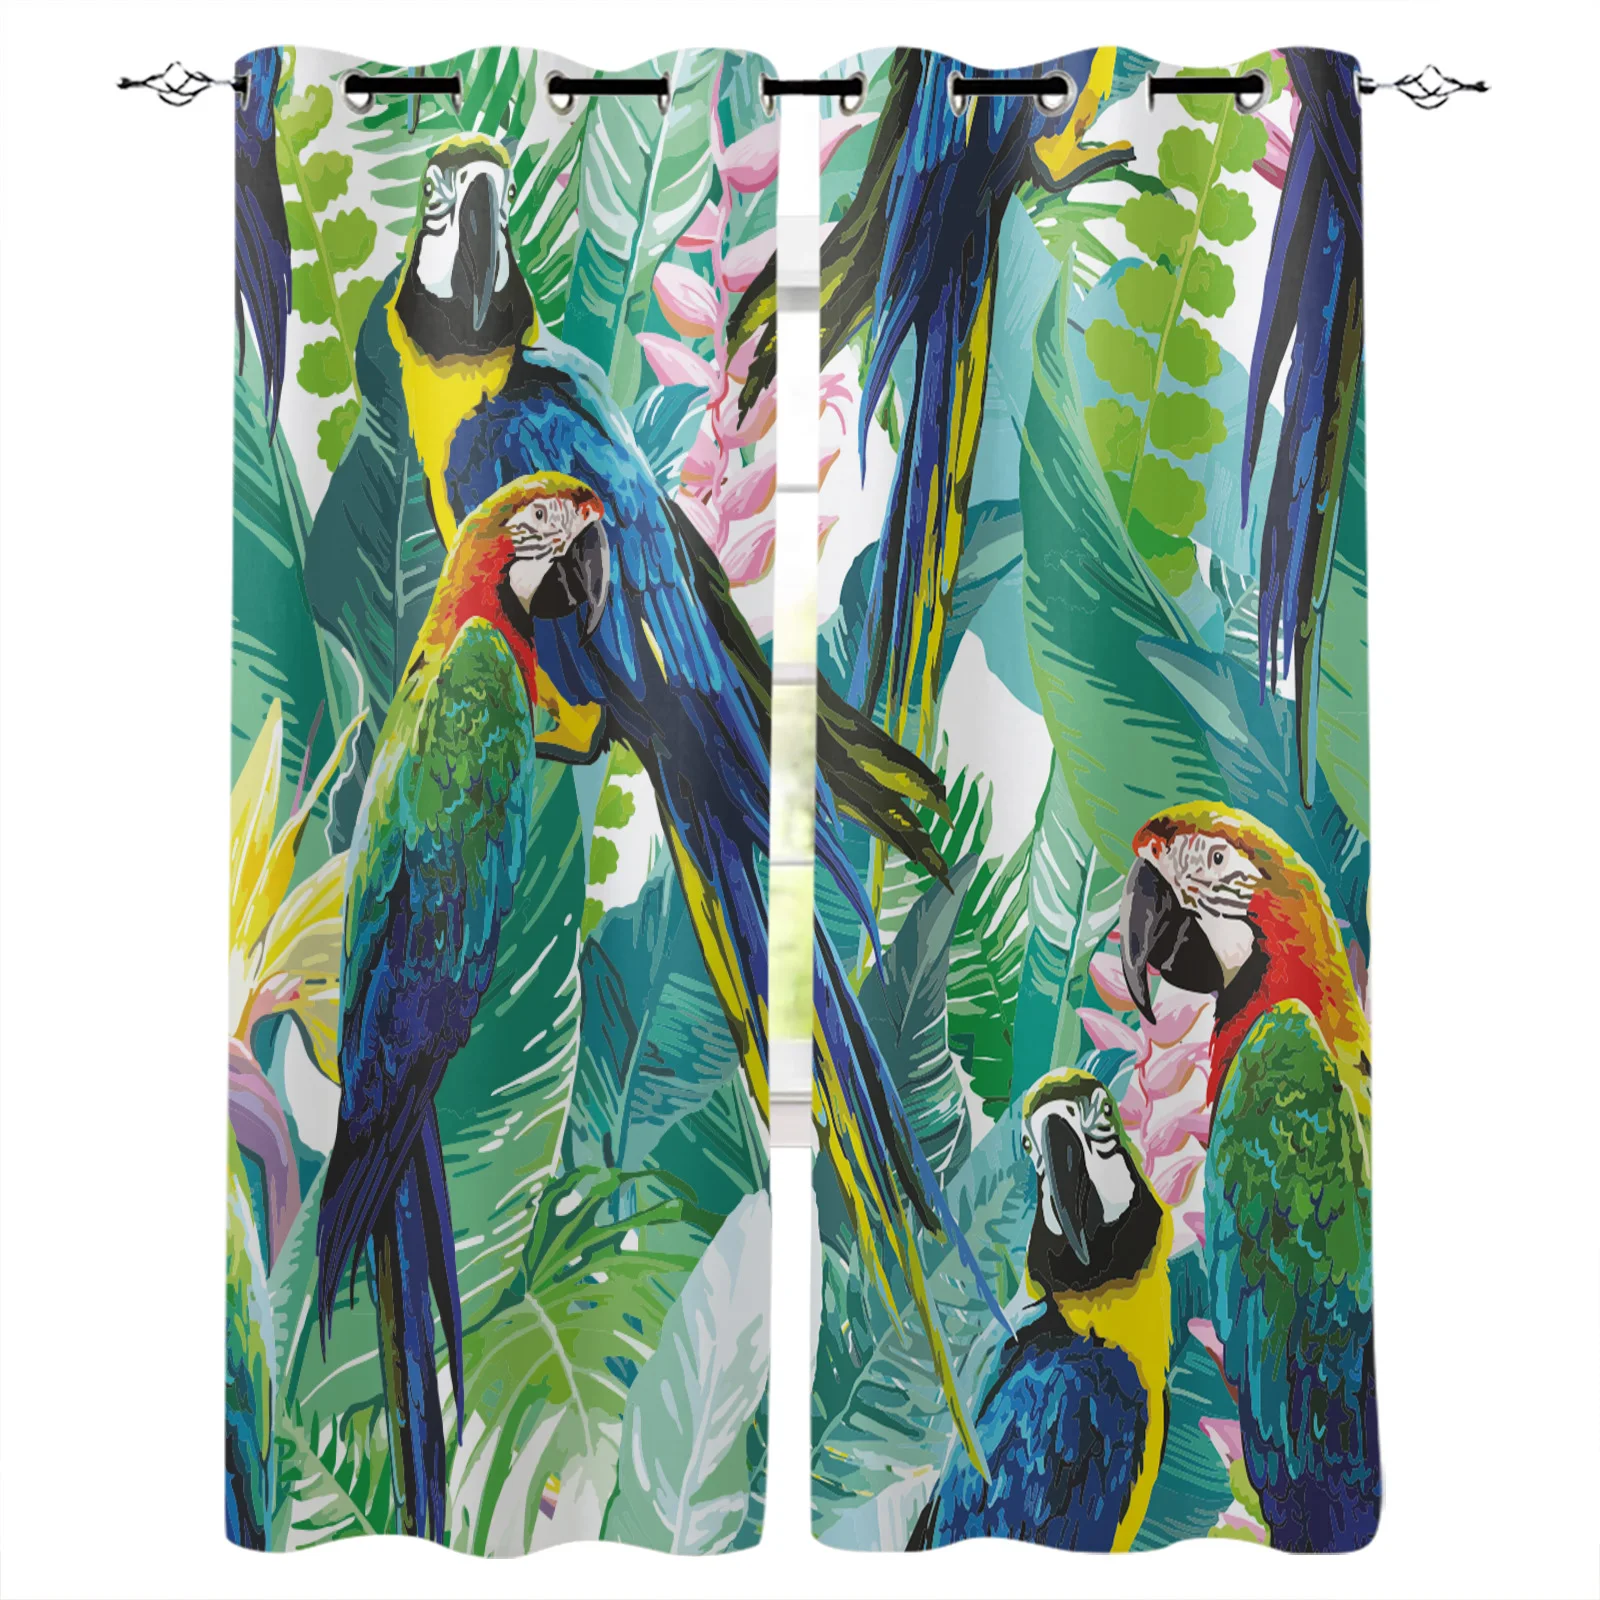 

Tropical Jungle Parrot Green Plants Blackout Curtains Window Curtains For Bedroom Living Room Decor Window Treatments